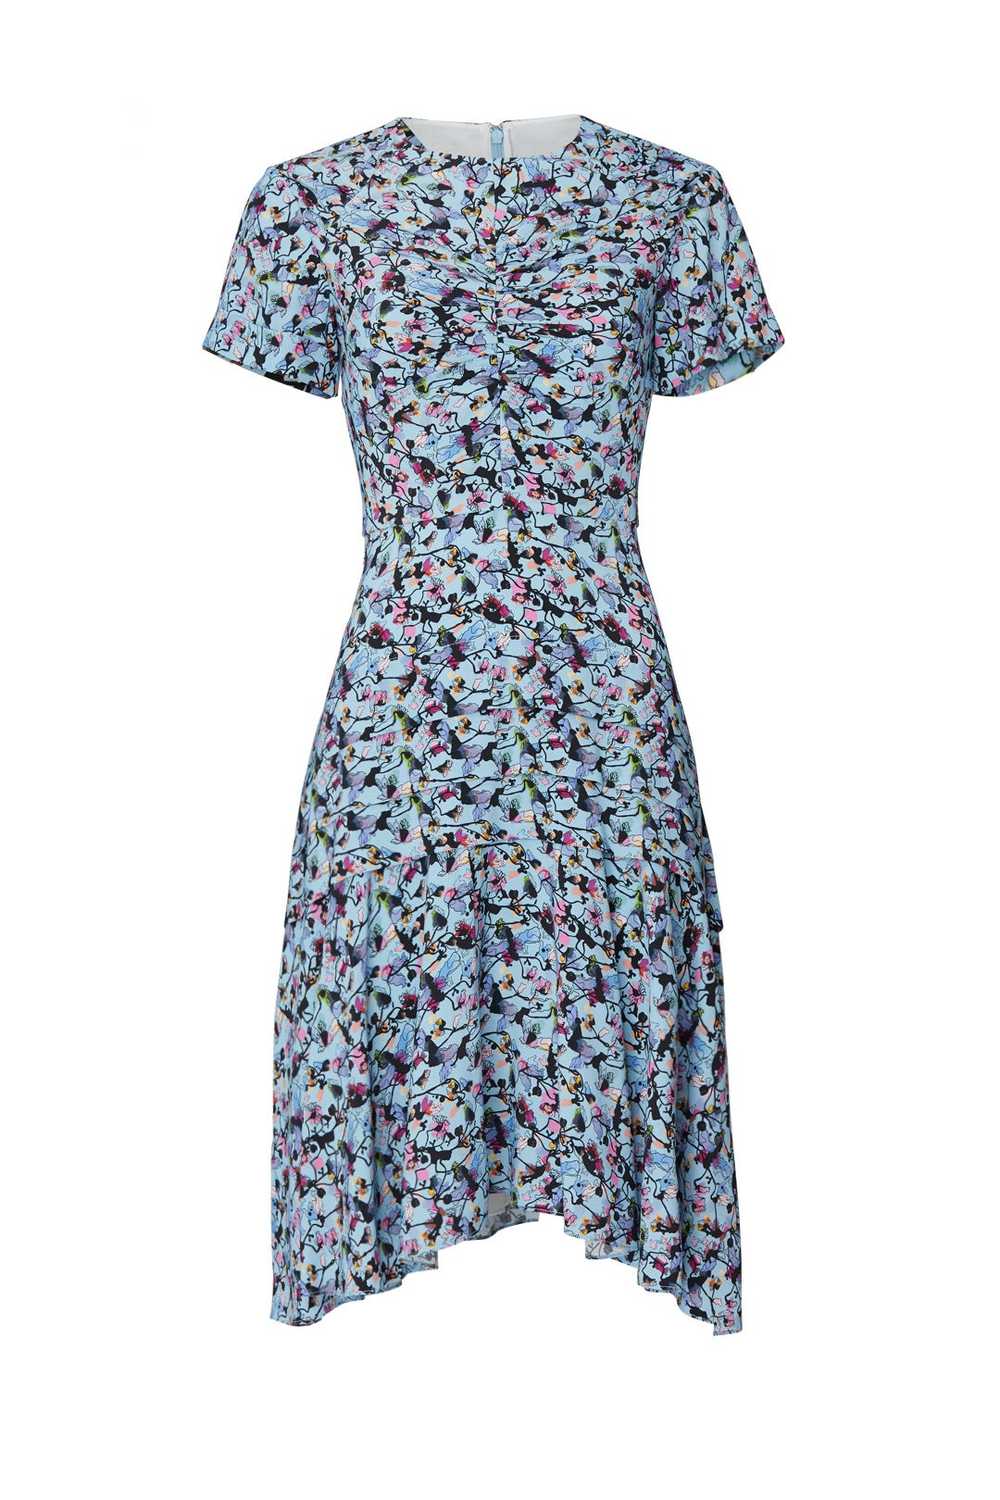 Jason Wu Collection Blue Floral Day Dress - image 4